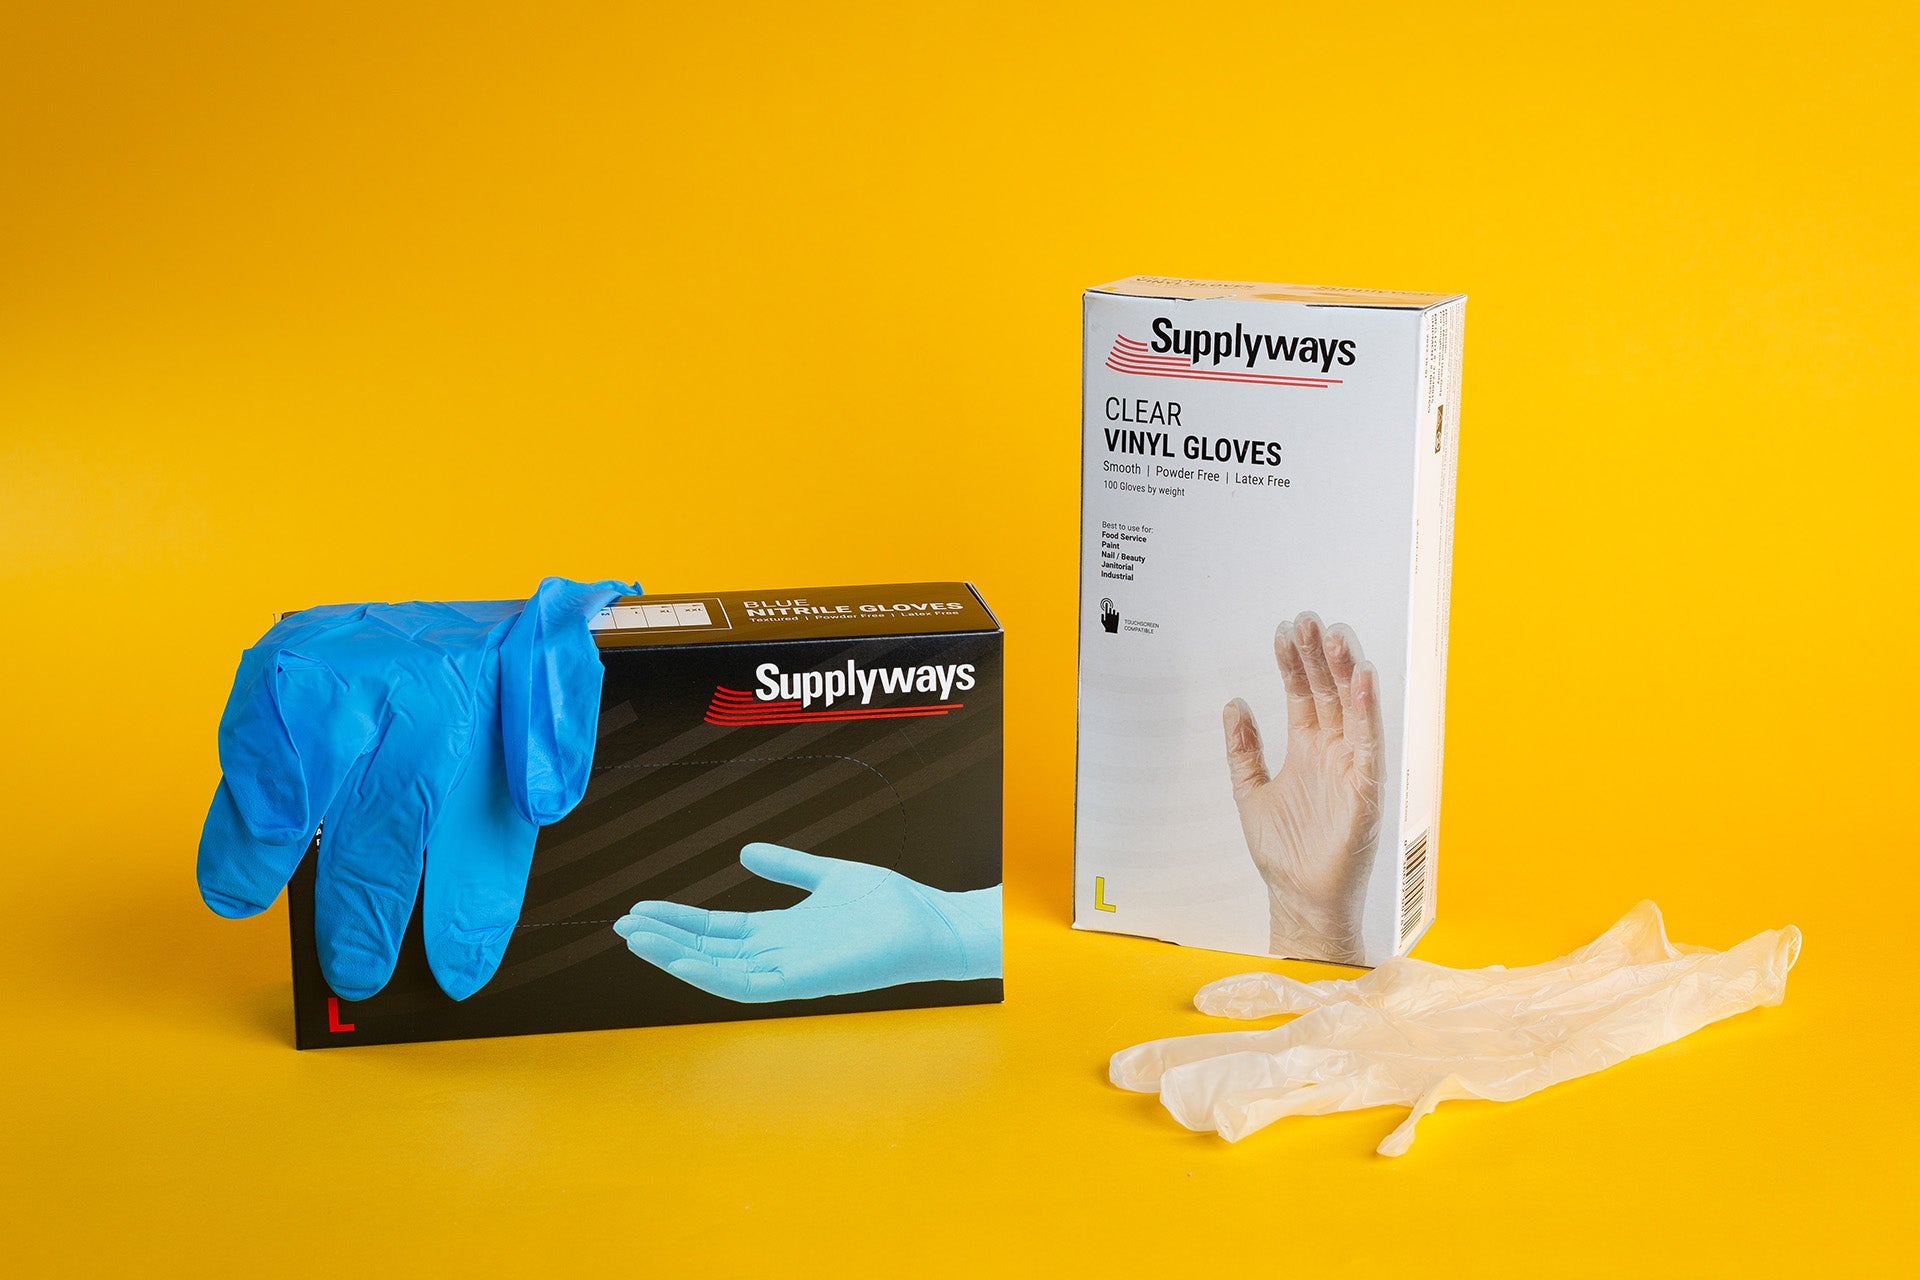 A black box of supplyways blue nitrile gloves and a white box of Supplyways clear vinyl gloves on a yellow backdrop